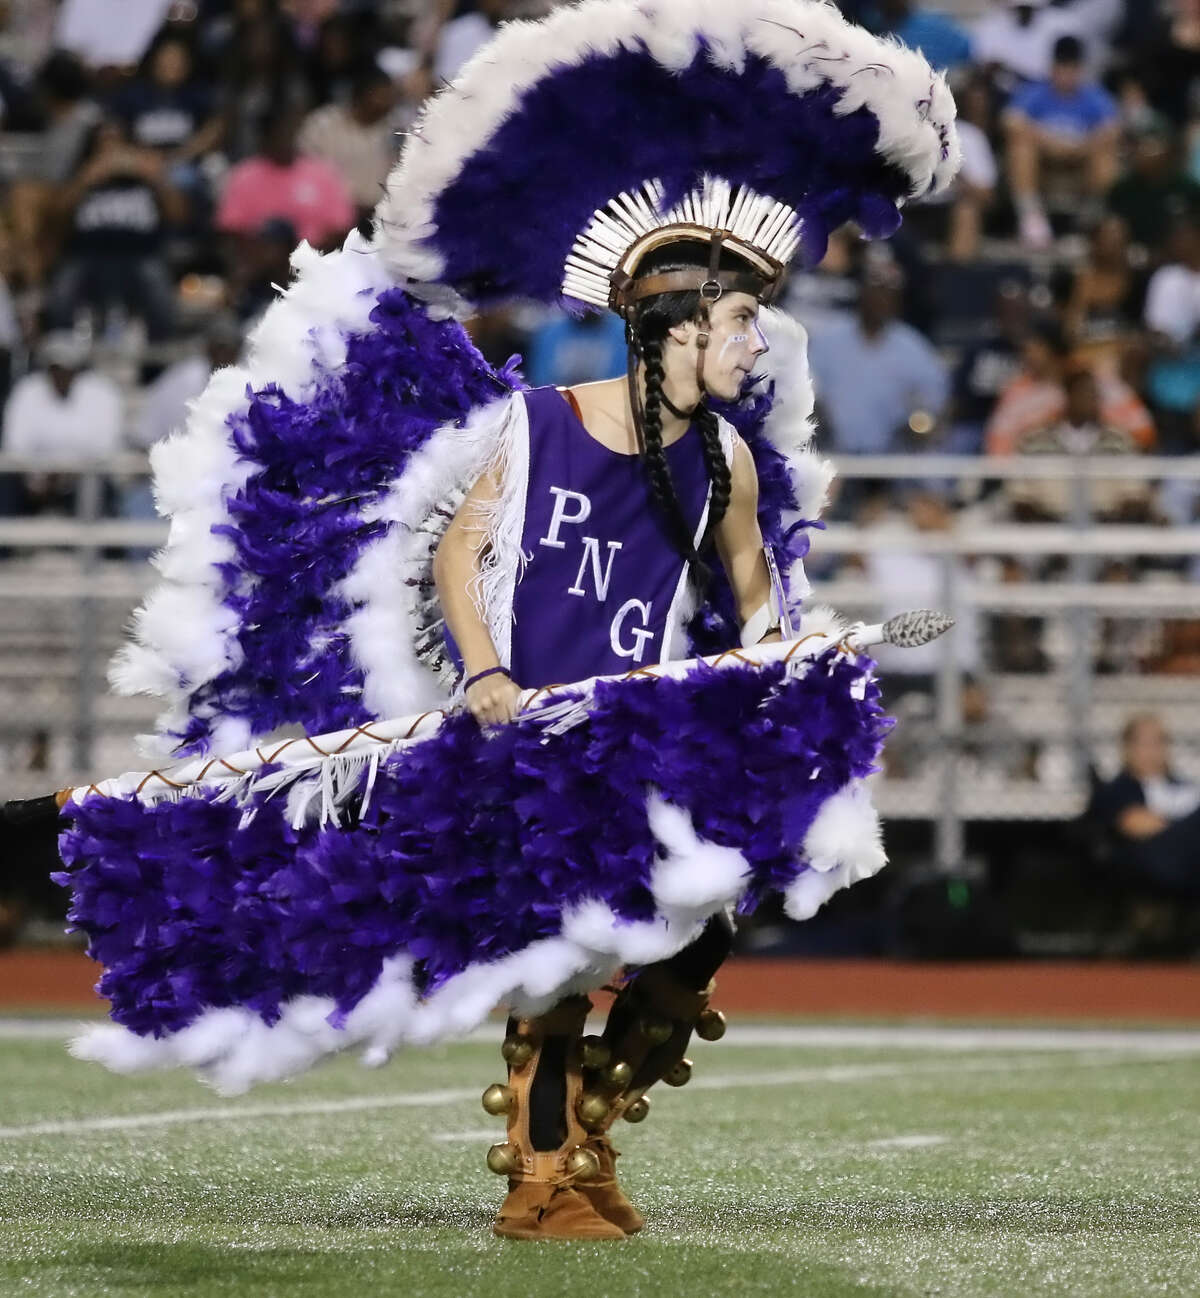 The Indian Spirit performs during halftime of game between the Port Neches-Groves Indians and the West Orange-Stark Mustangs at The Reservation, Friday, September 4, 2015. Photo provided by Kyle Ezell